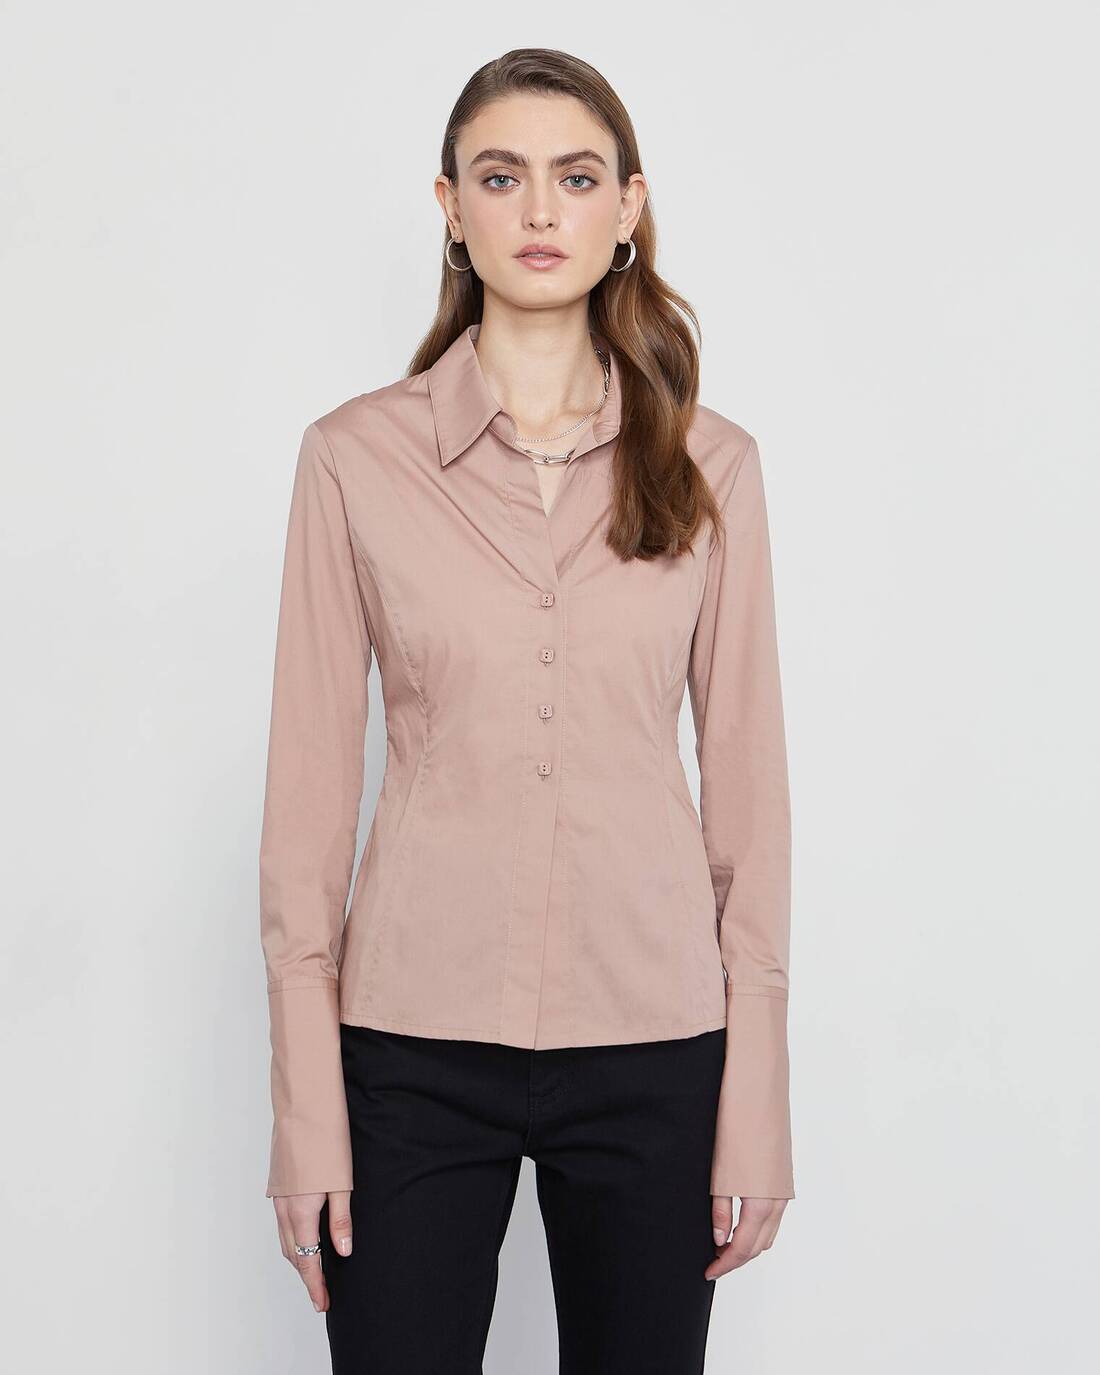 Fitted silhouette blouse  